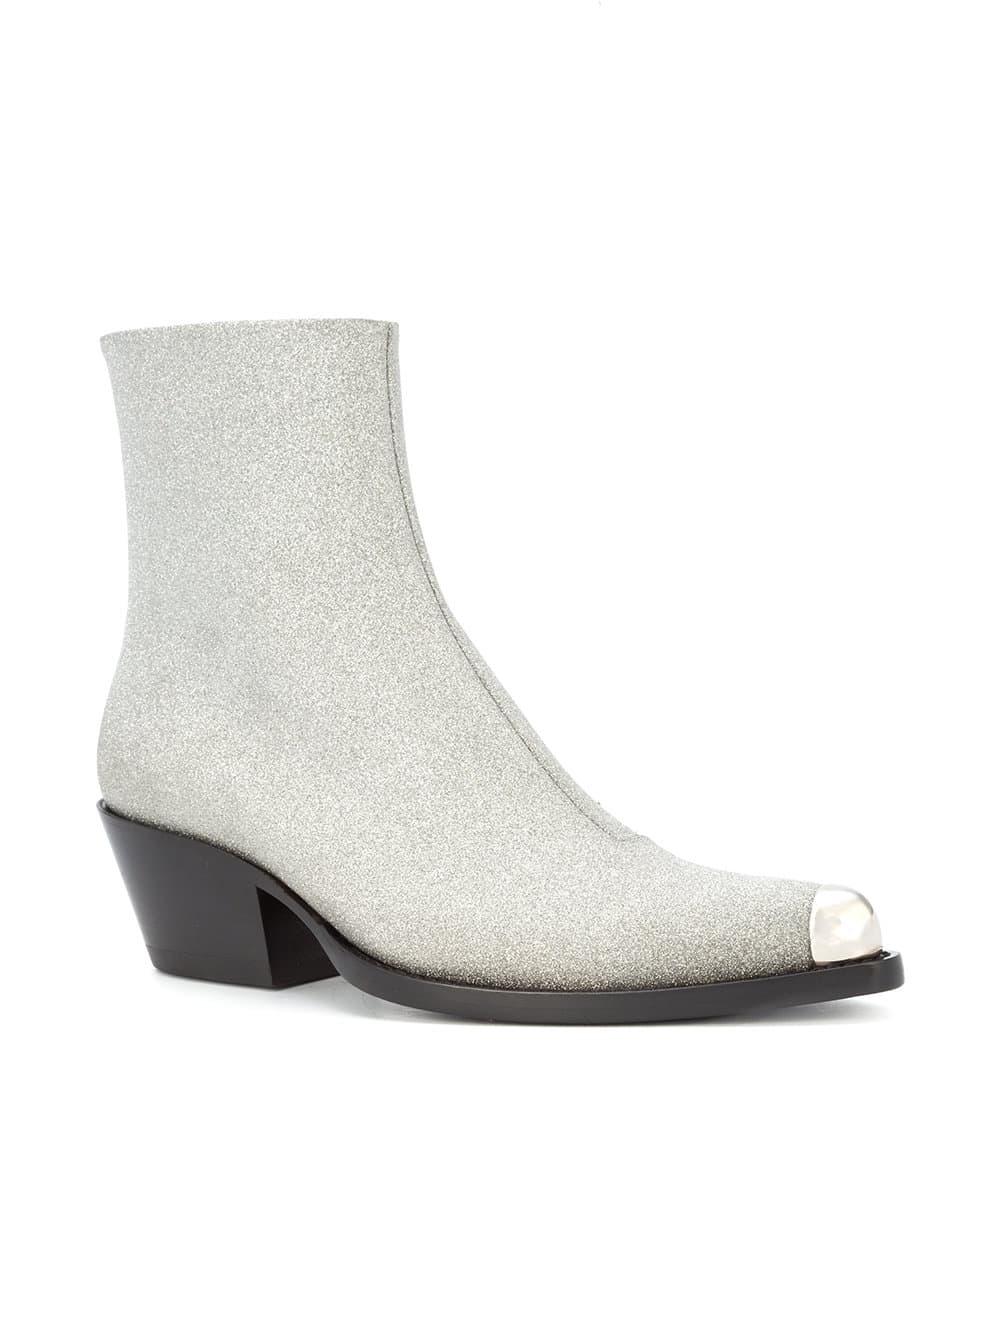 CALVIN KLEIN 205W39NYC ankle boots 